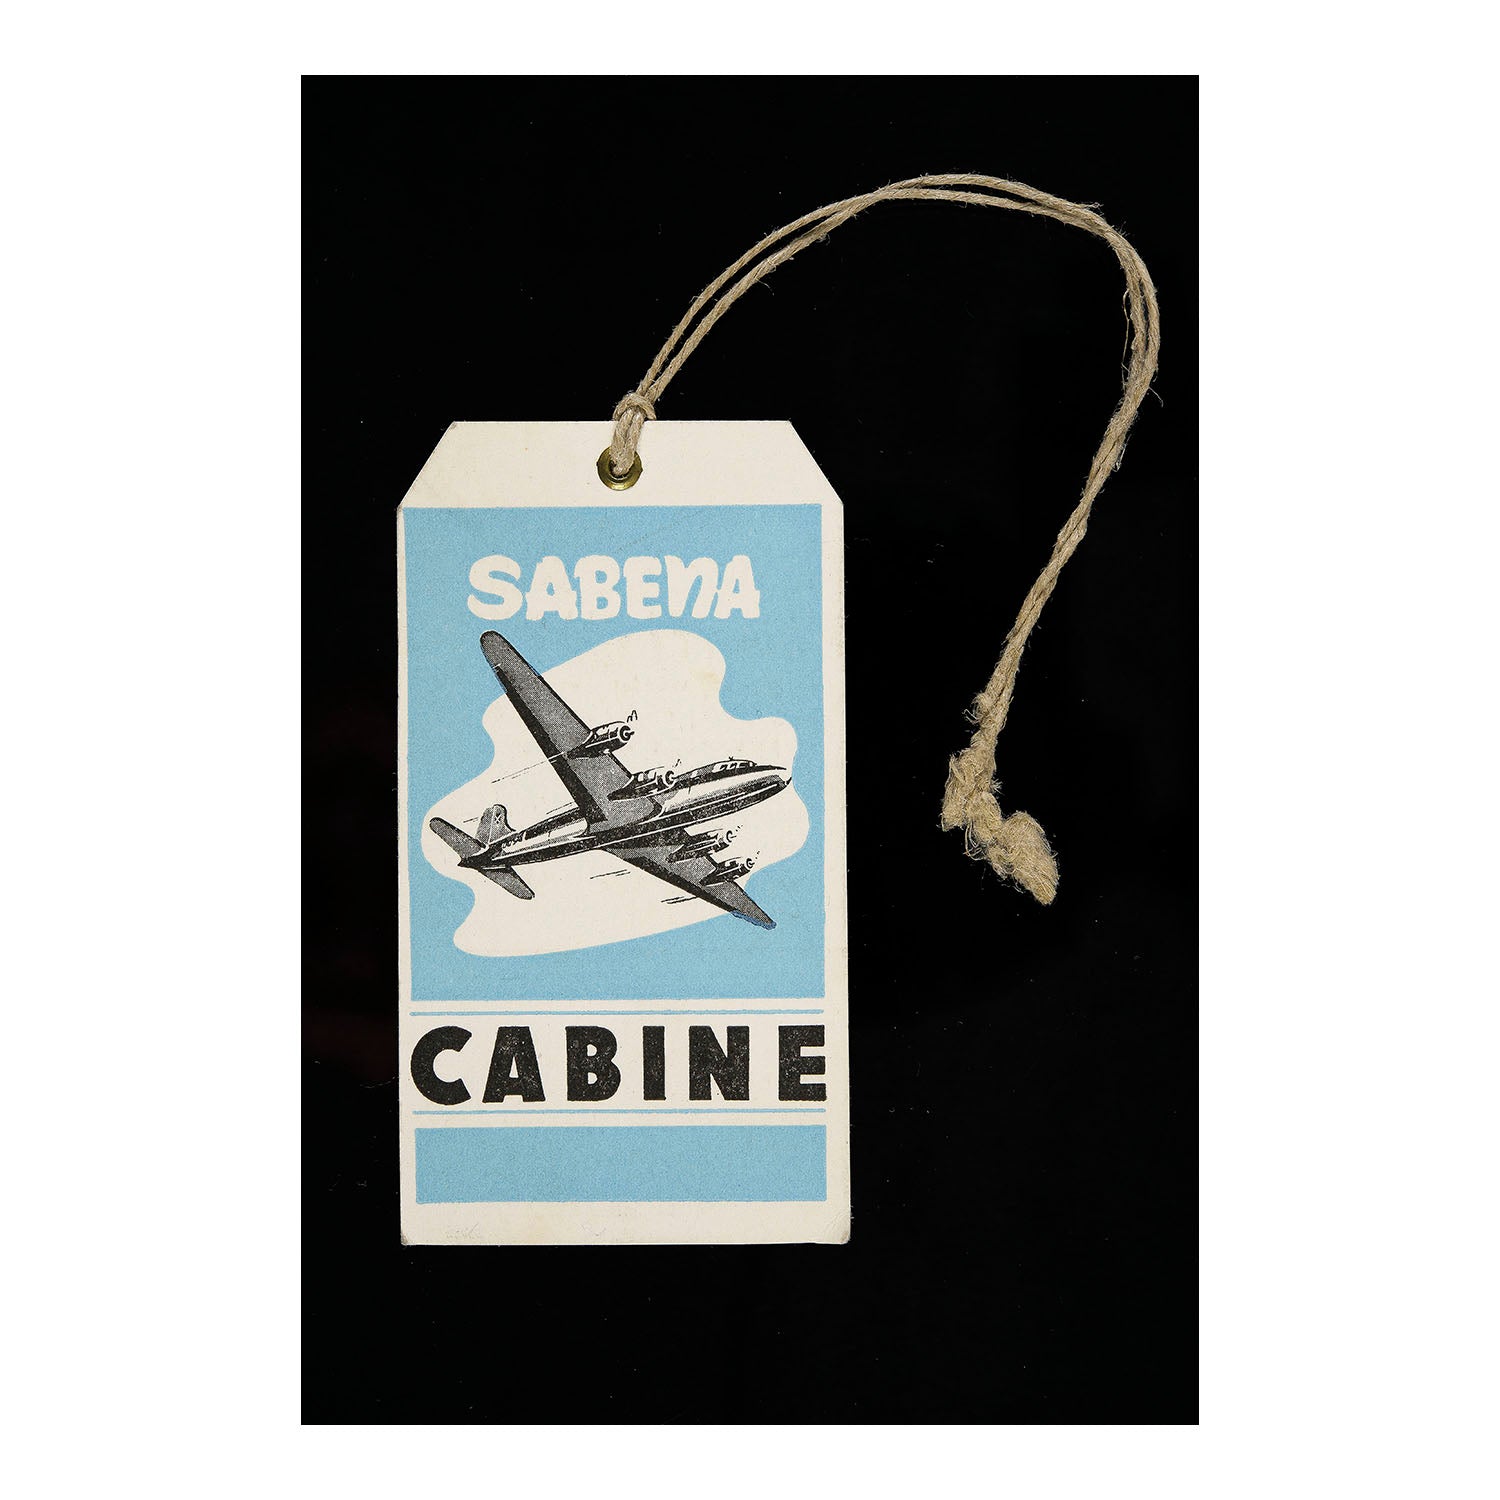 Sabena Airlines, Cabin Luggage tag